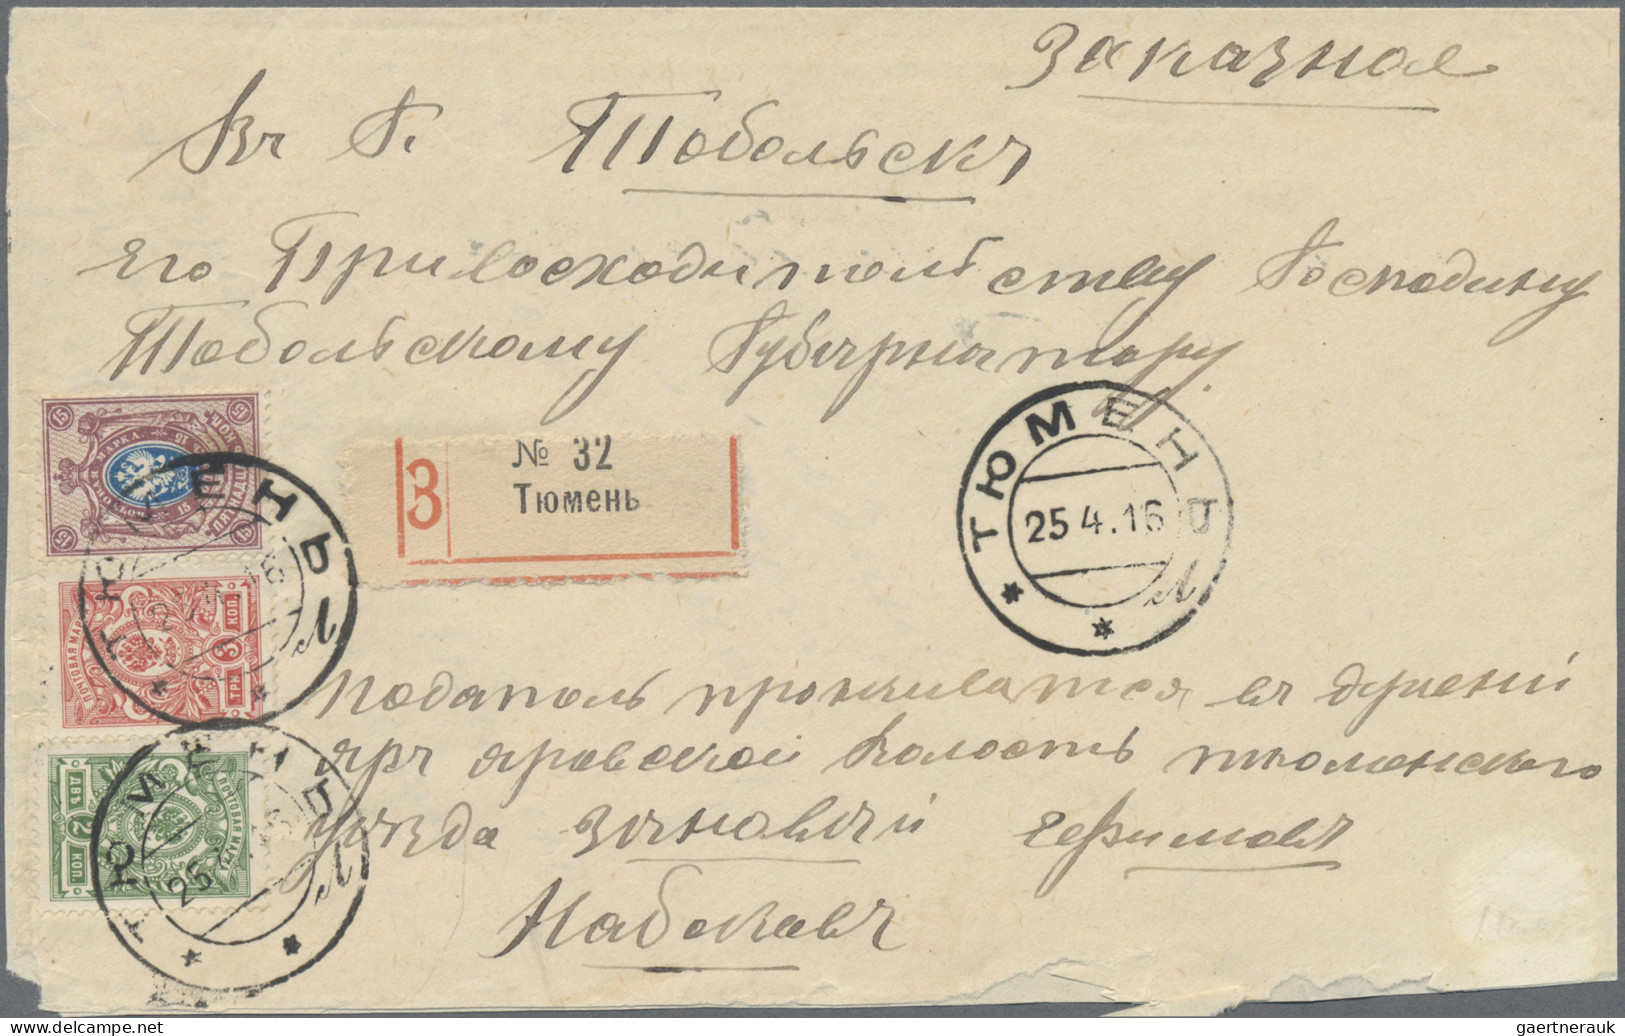 Russia: 1910/1916, Siberia, four entires: registered stampless district cover TO